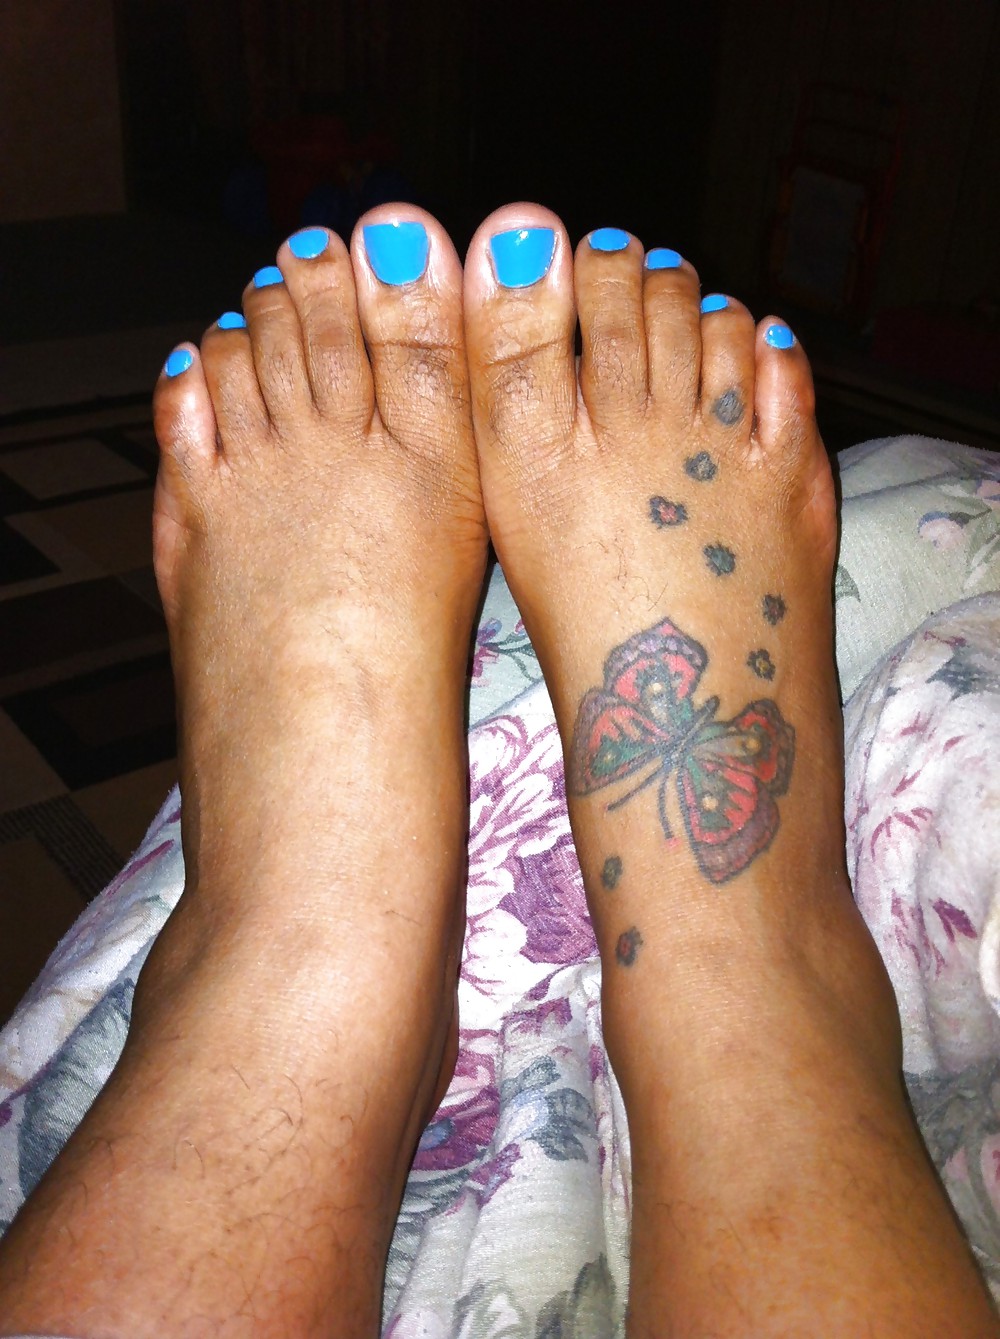 New Blue Painted Toes from a Freind porn pictures